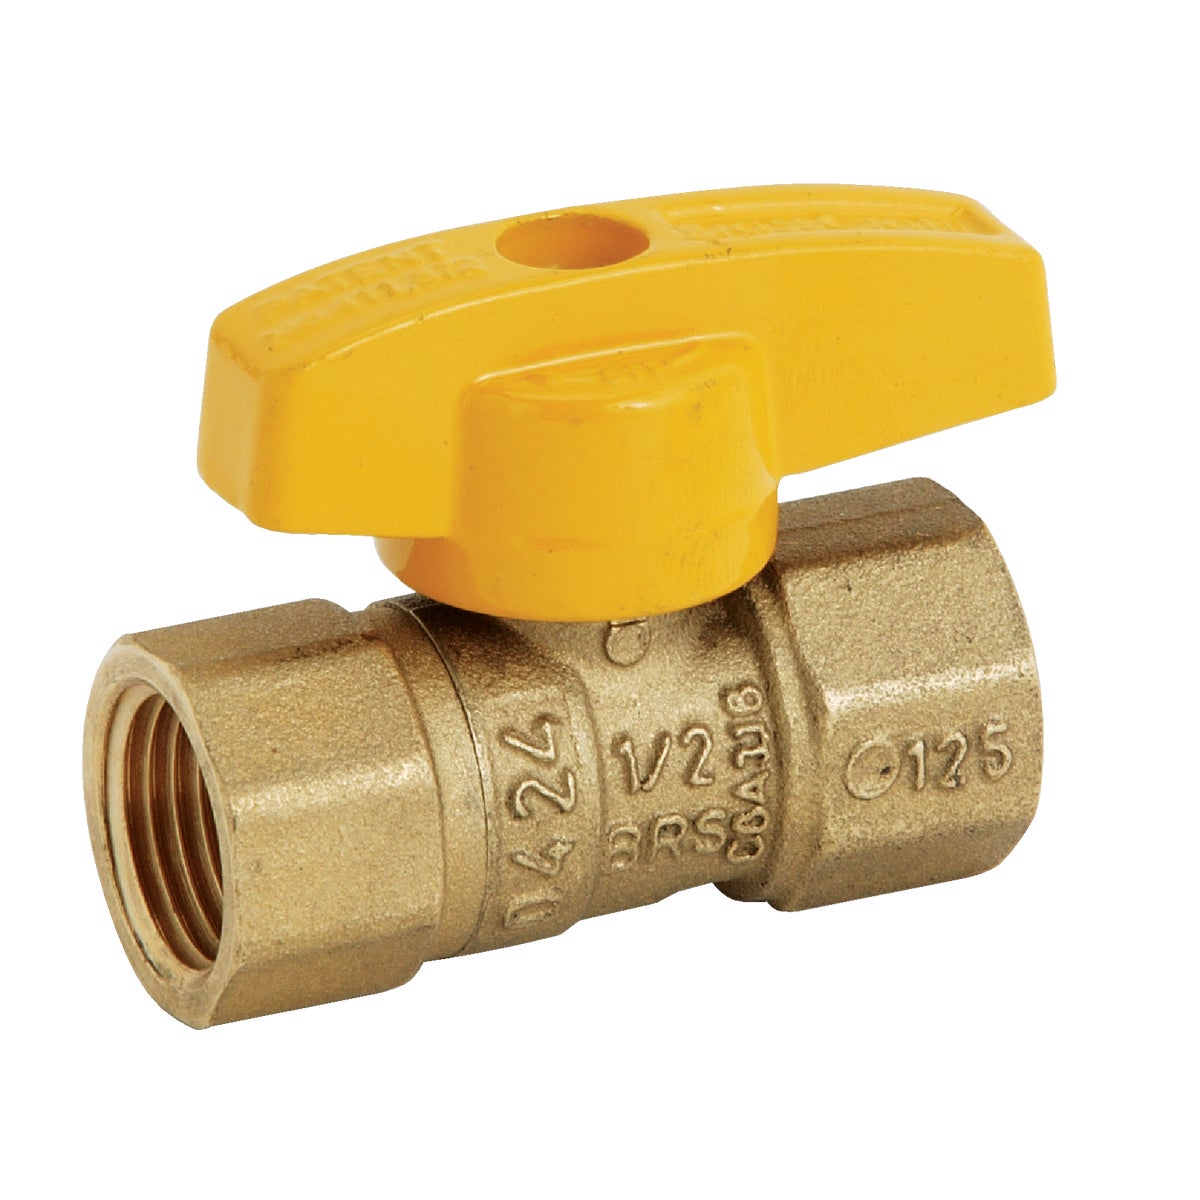 Item 443085, This straight gas shutoff valve is built with a forged brass body to 